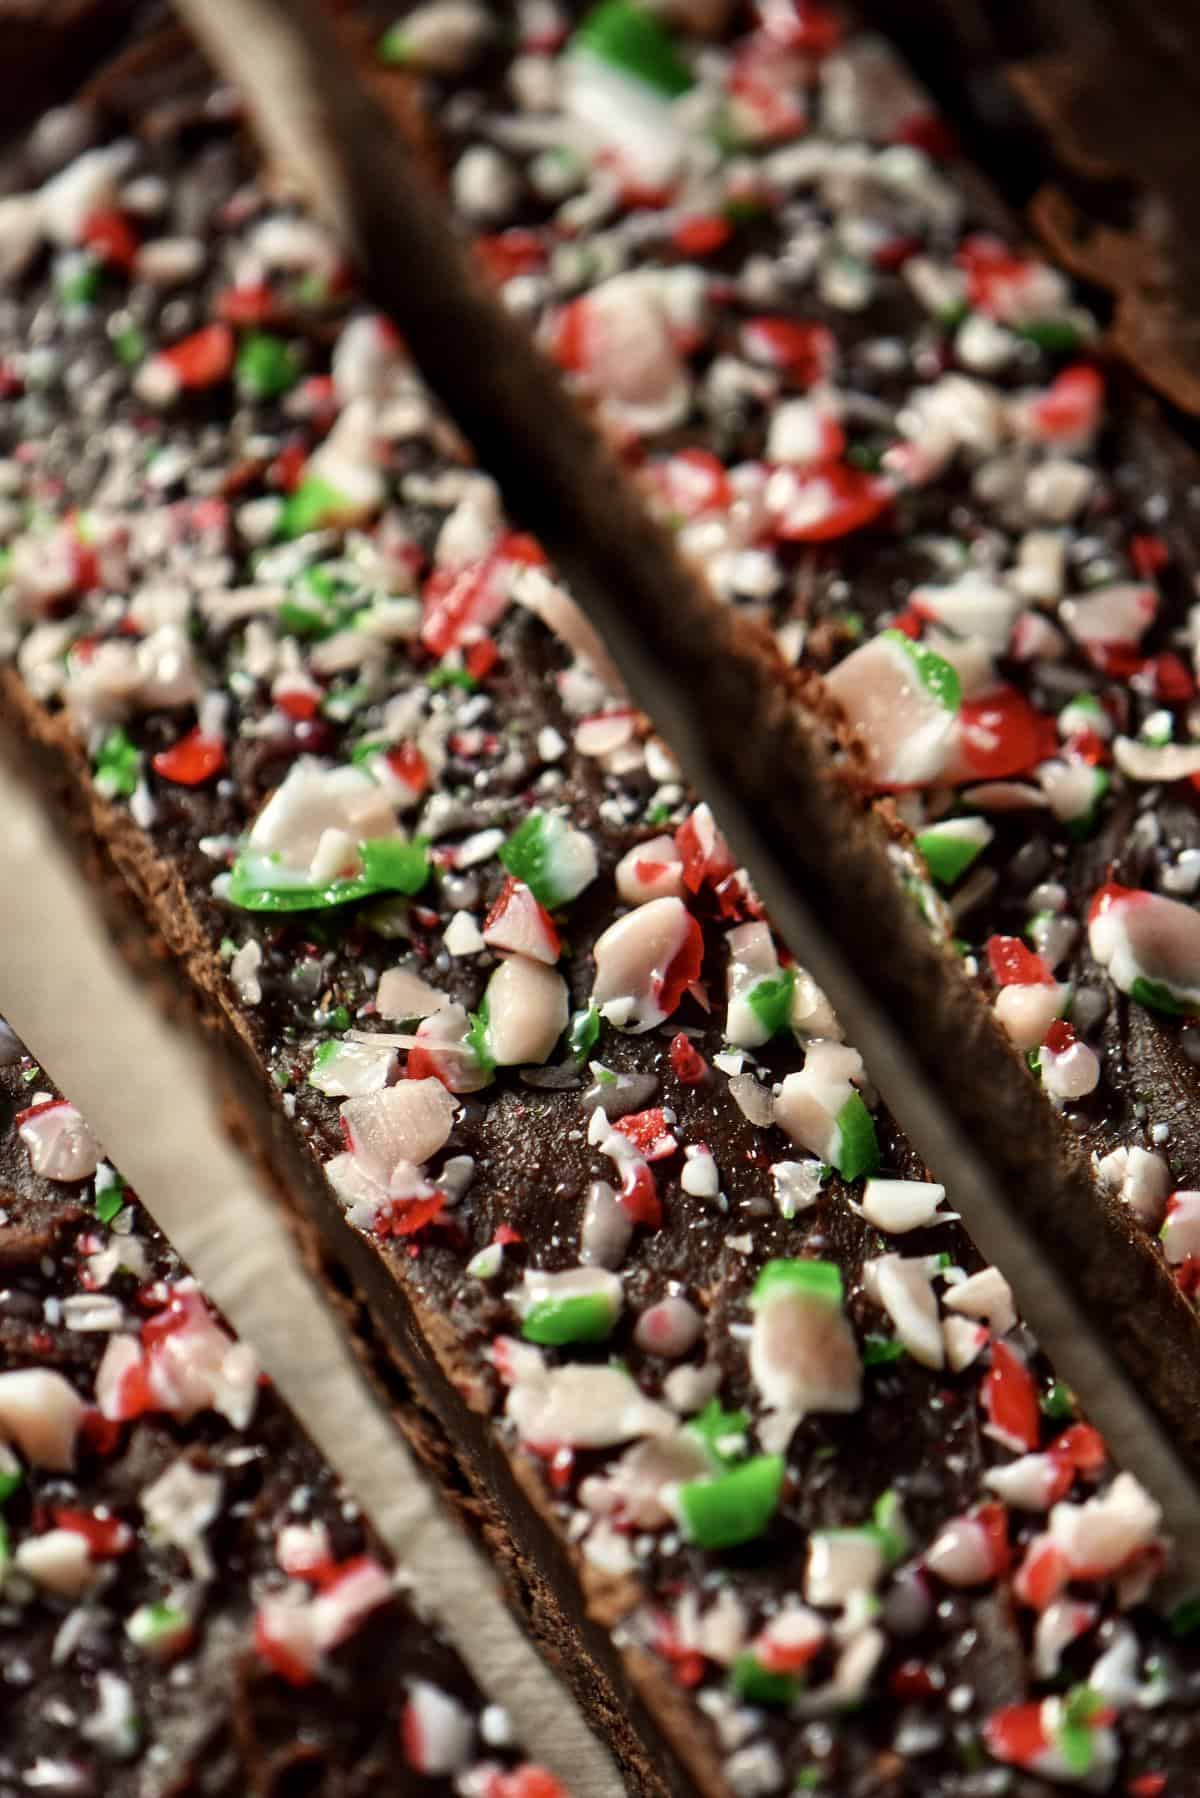 Strips of peppermint topped chocolate fudge. 